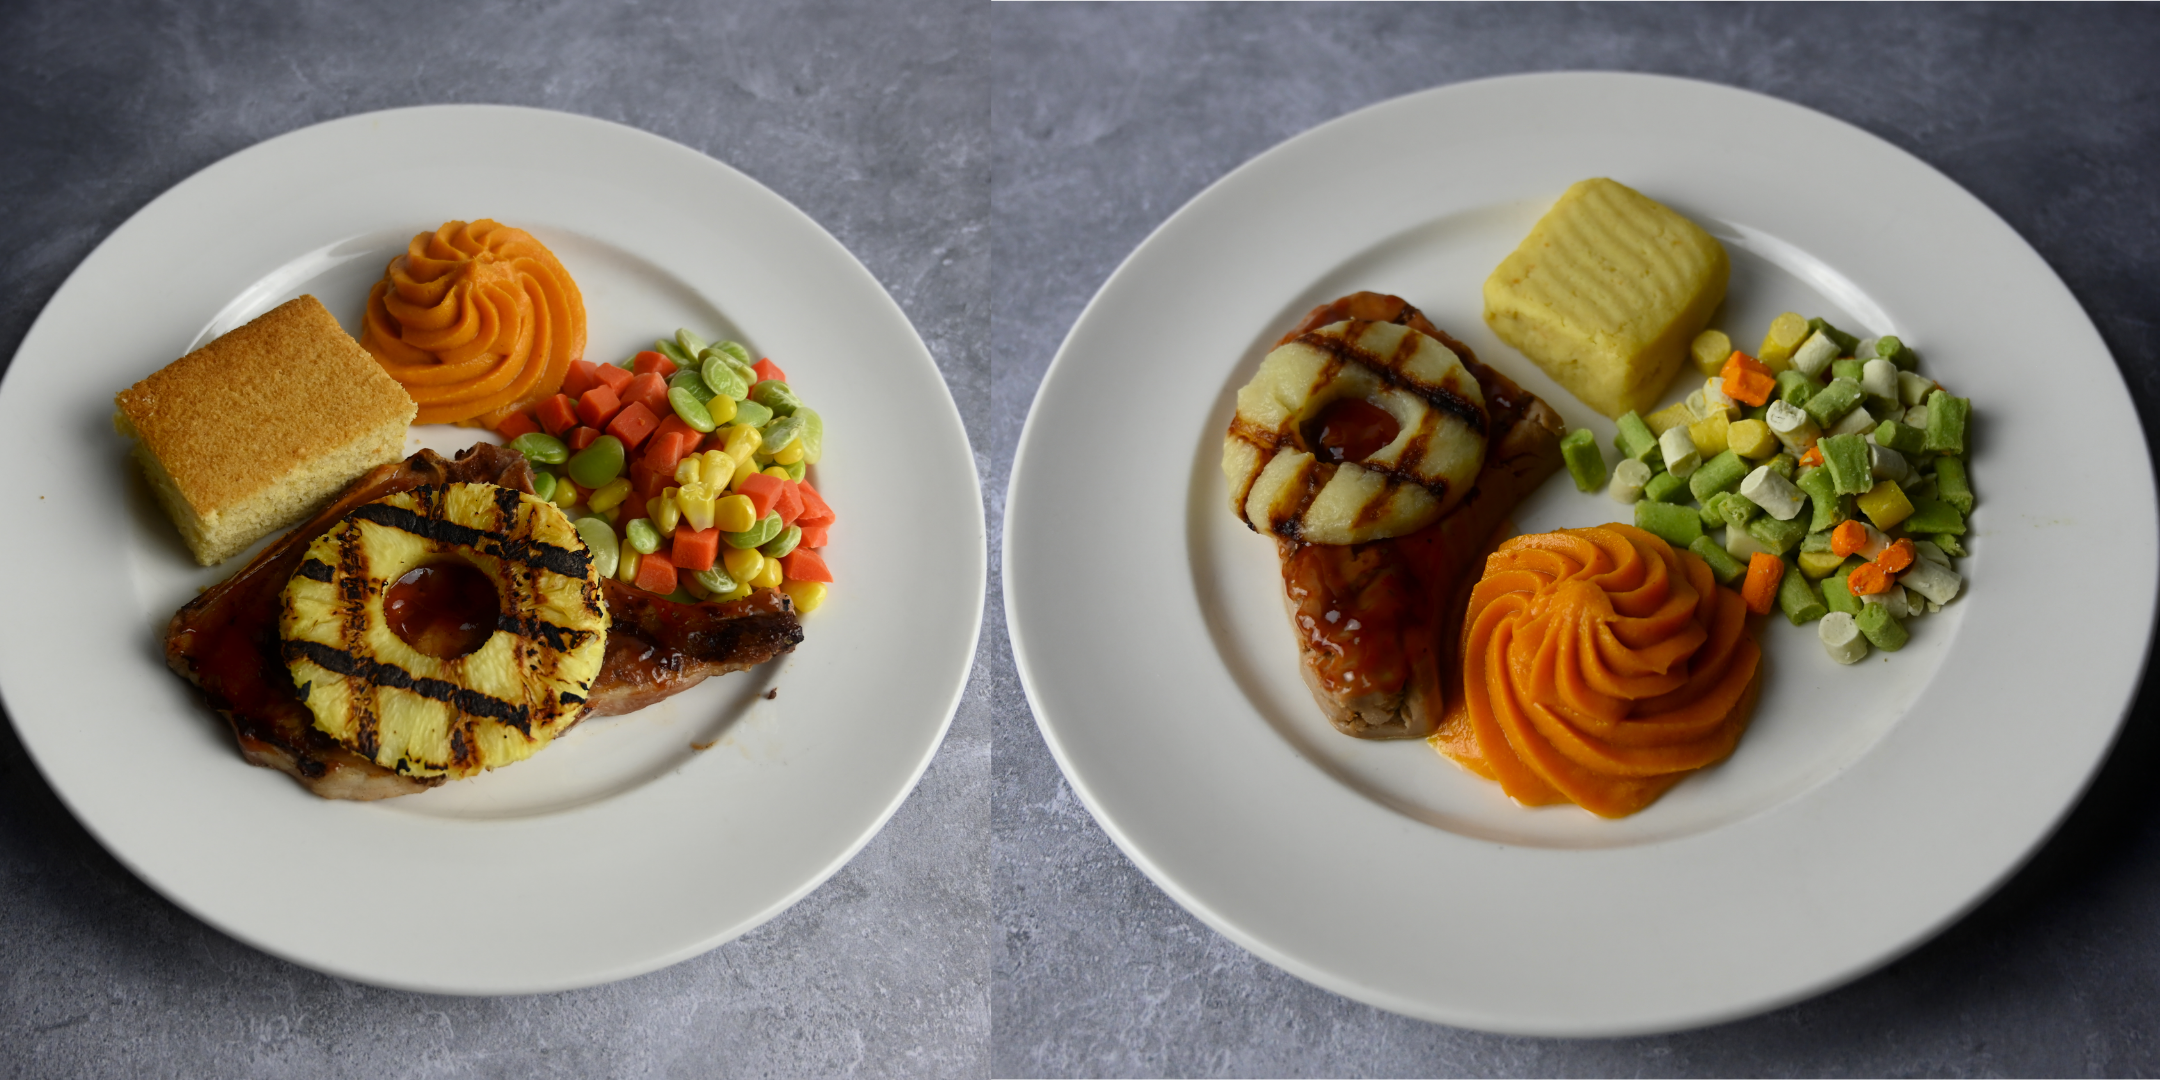 Two versions of the same pork chop meal, the one on the right is all puree food while the left is real meat and veggies